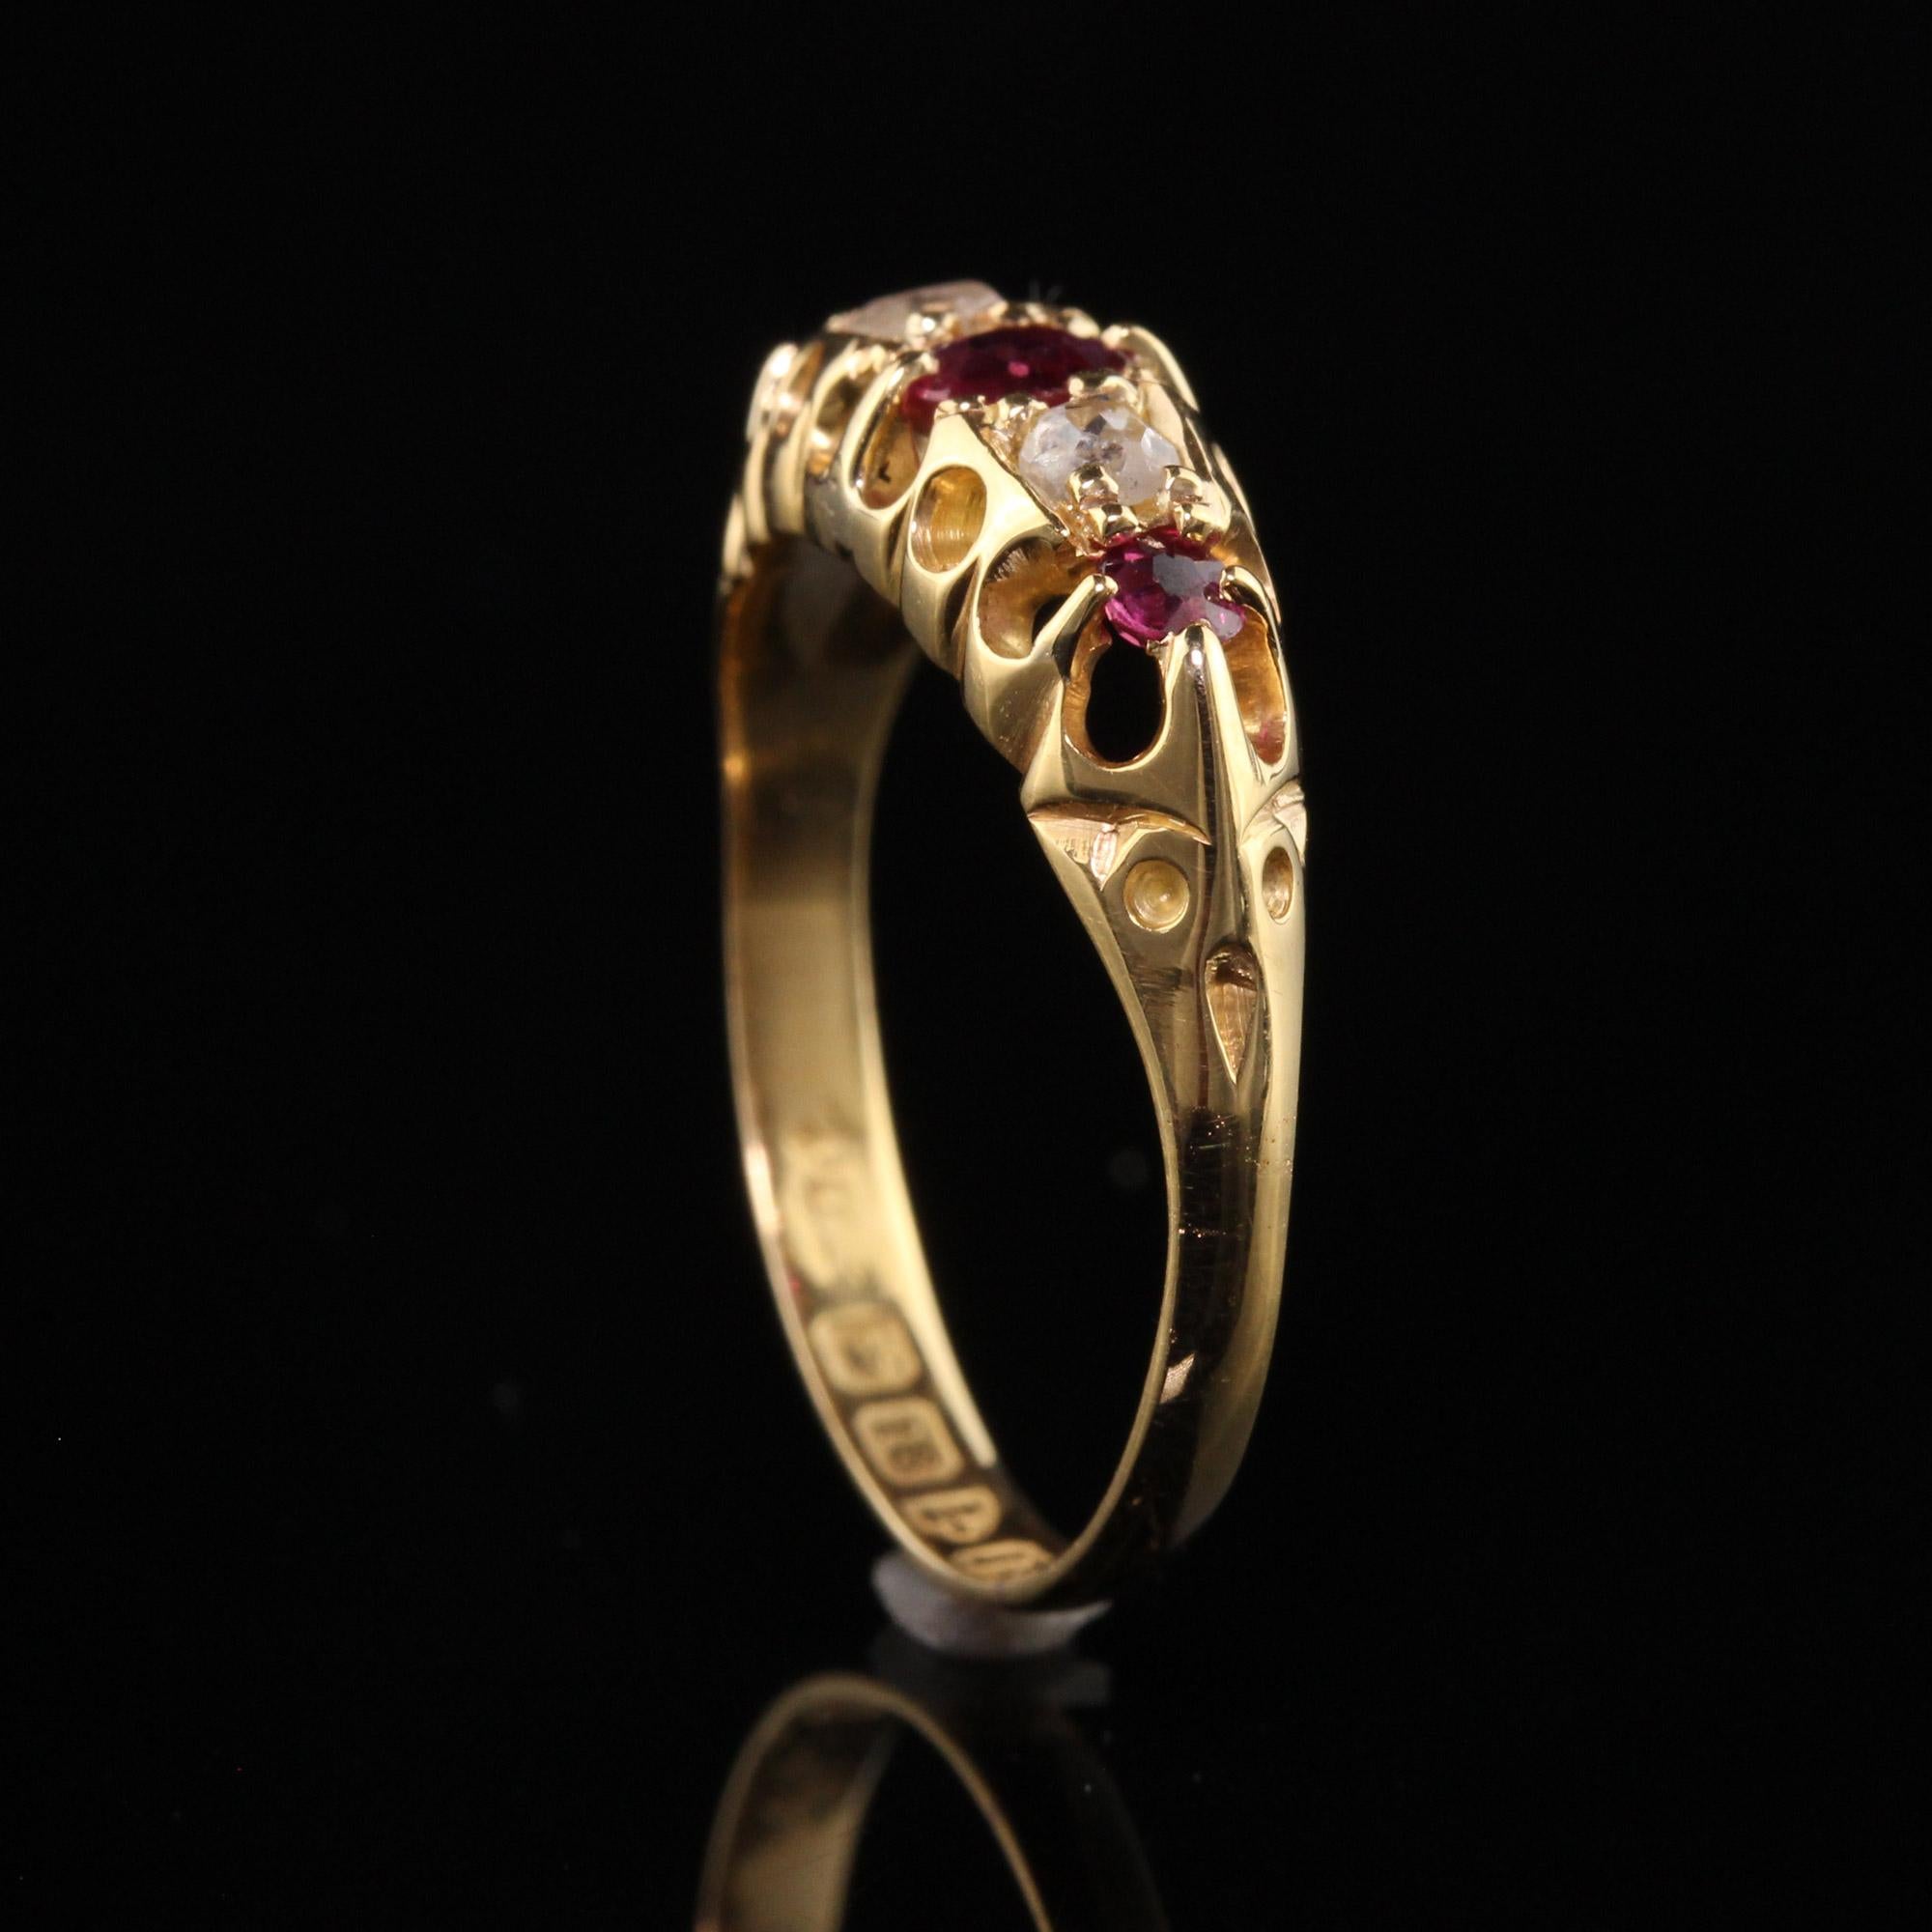 Antique Victorian English 18K Yellow Gold Rose Cut Diamond and Ruby Ring 1